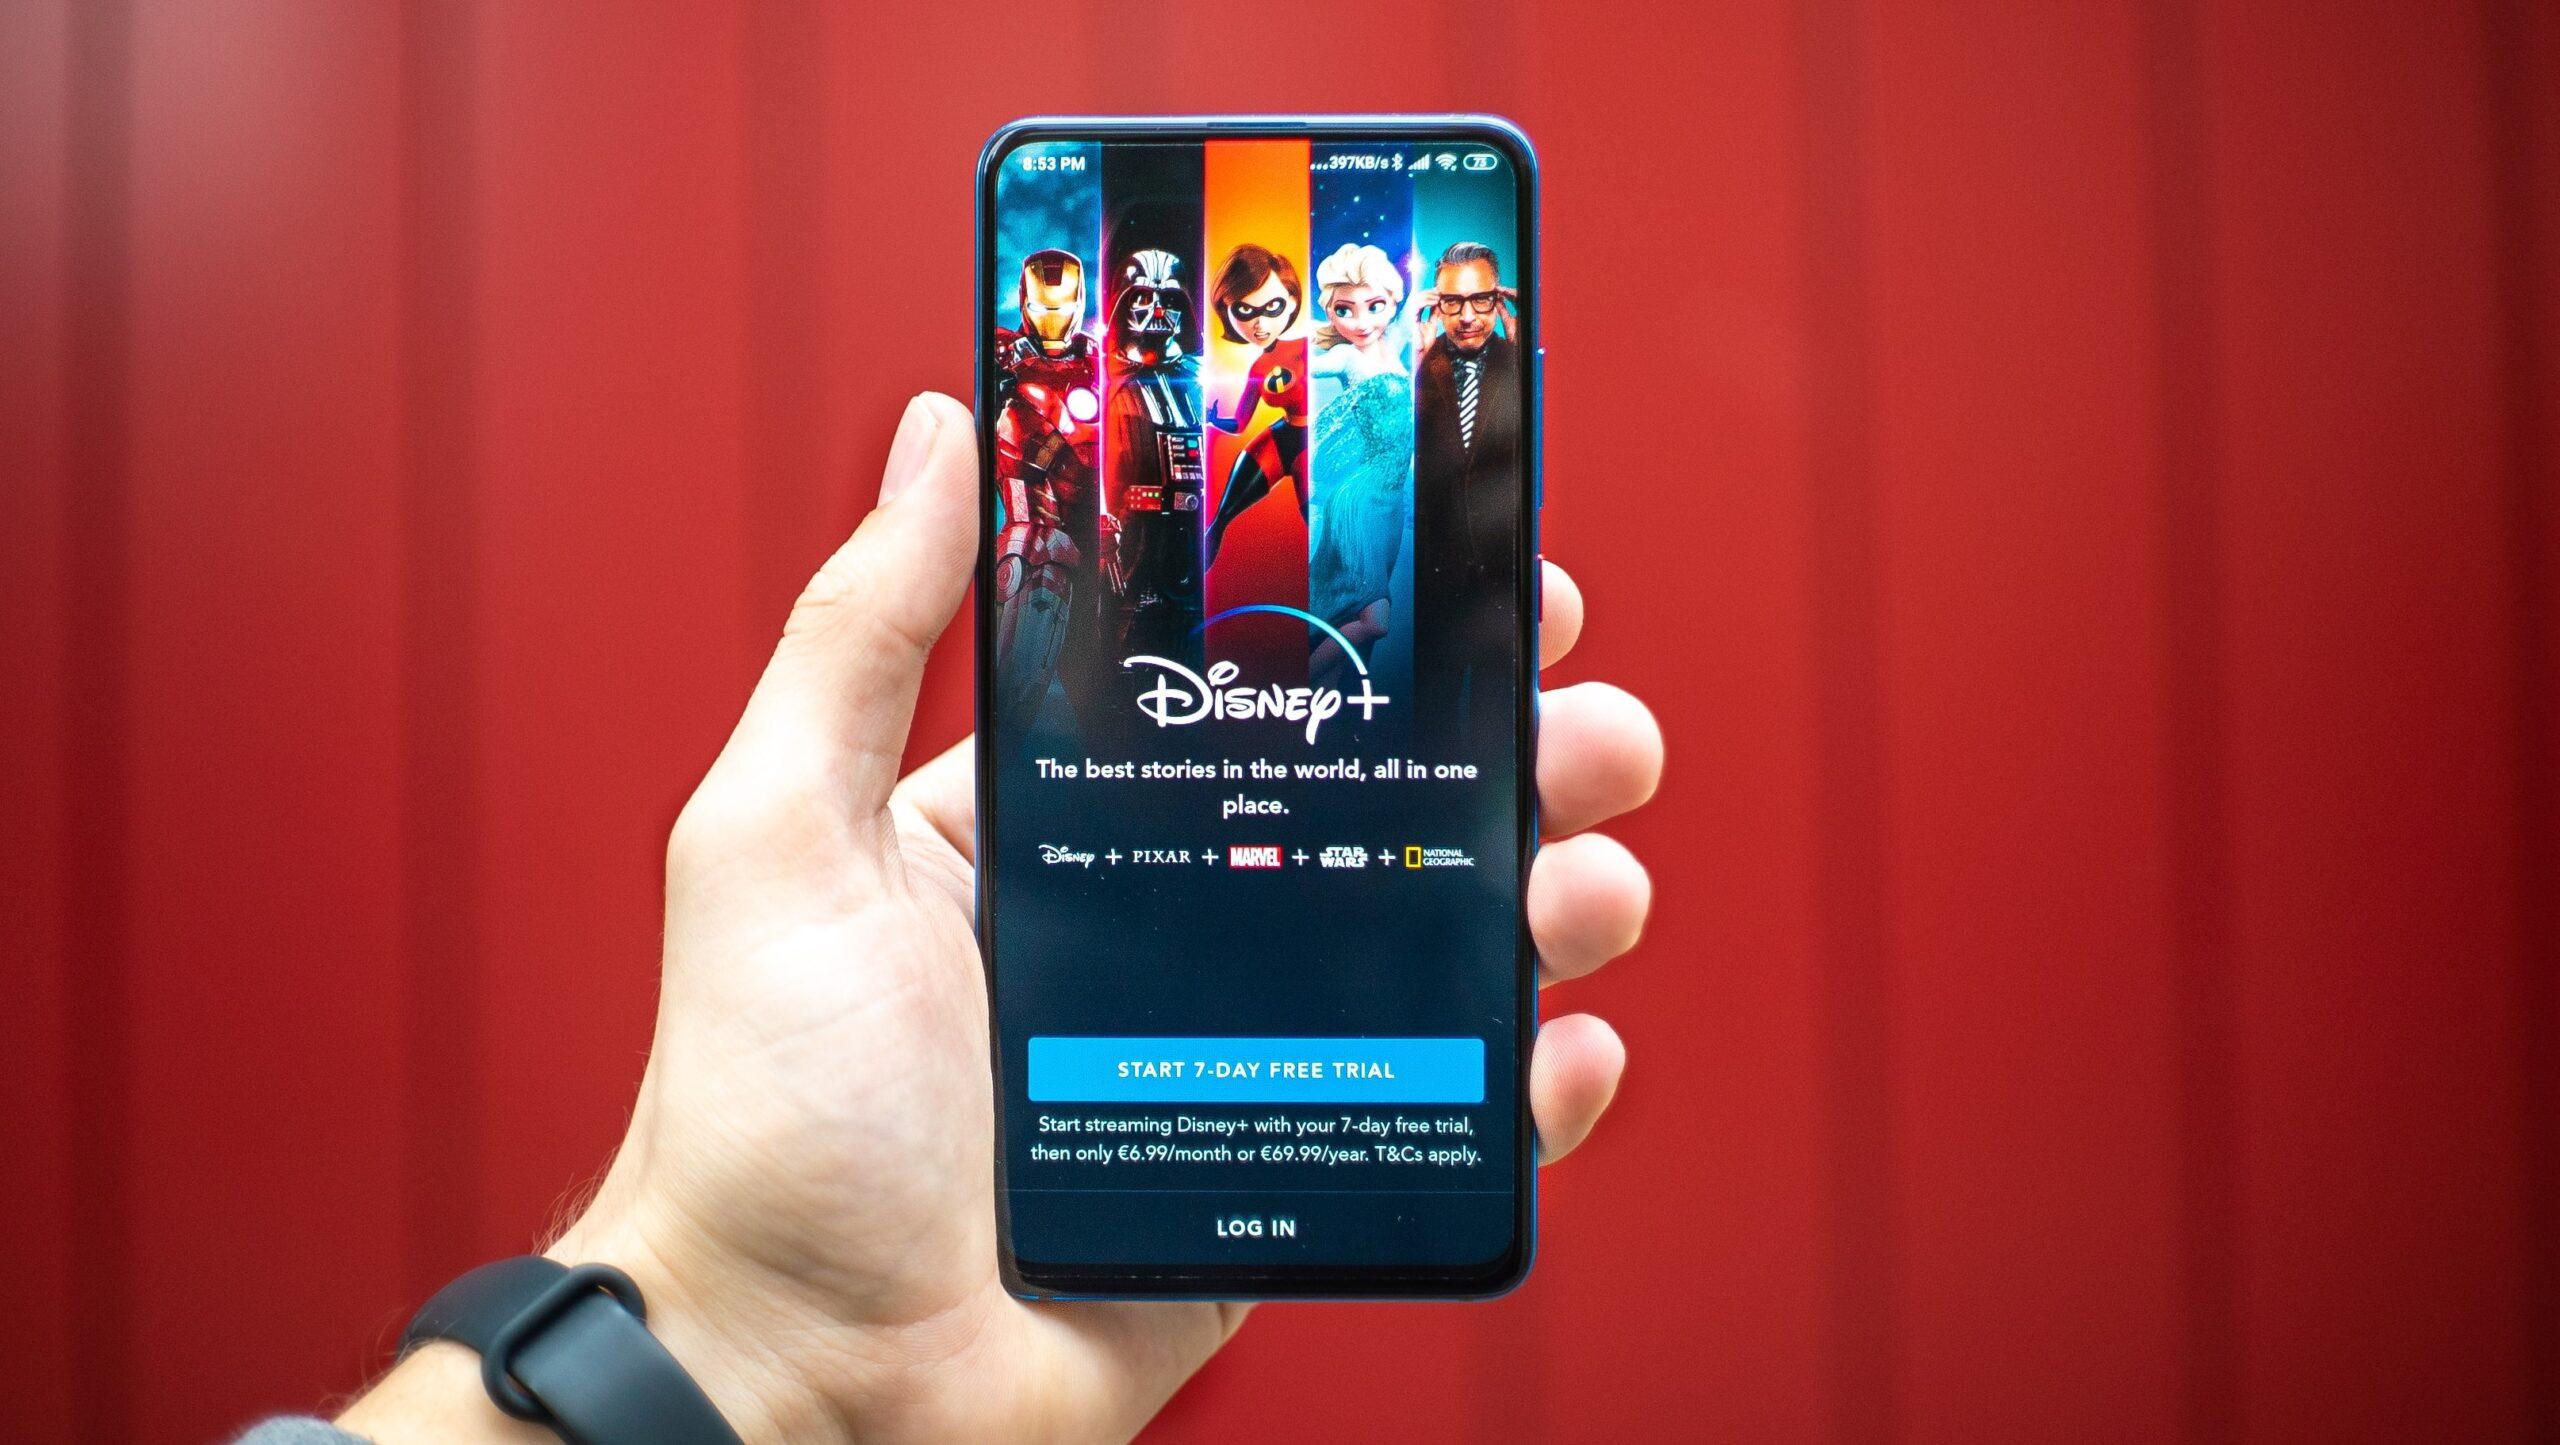 Close up of a hand holding a smartphone displaying the Disney+ app homepage against a red background.